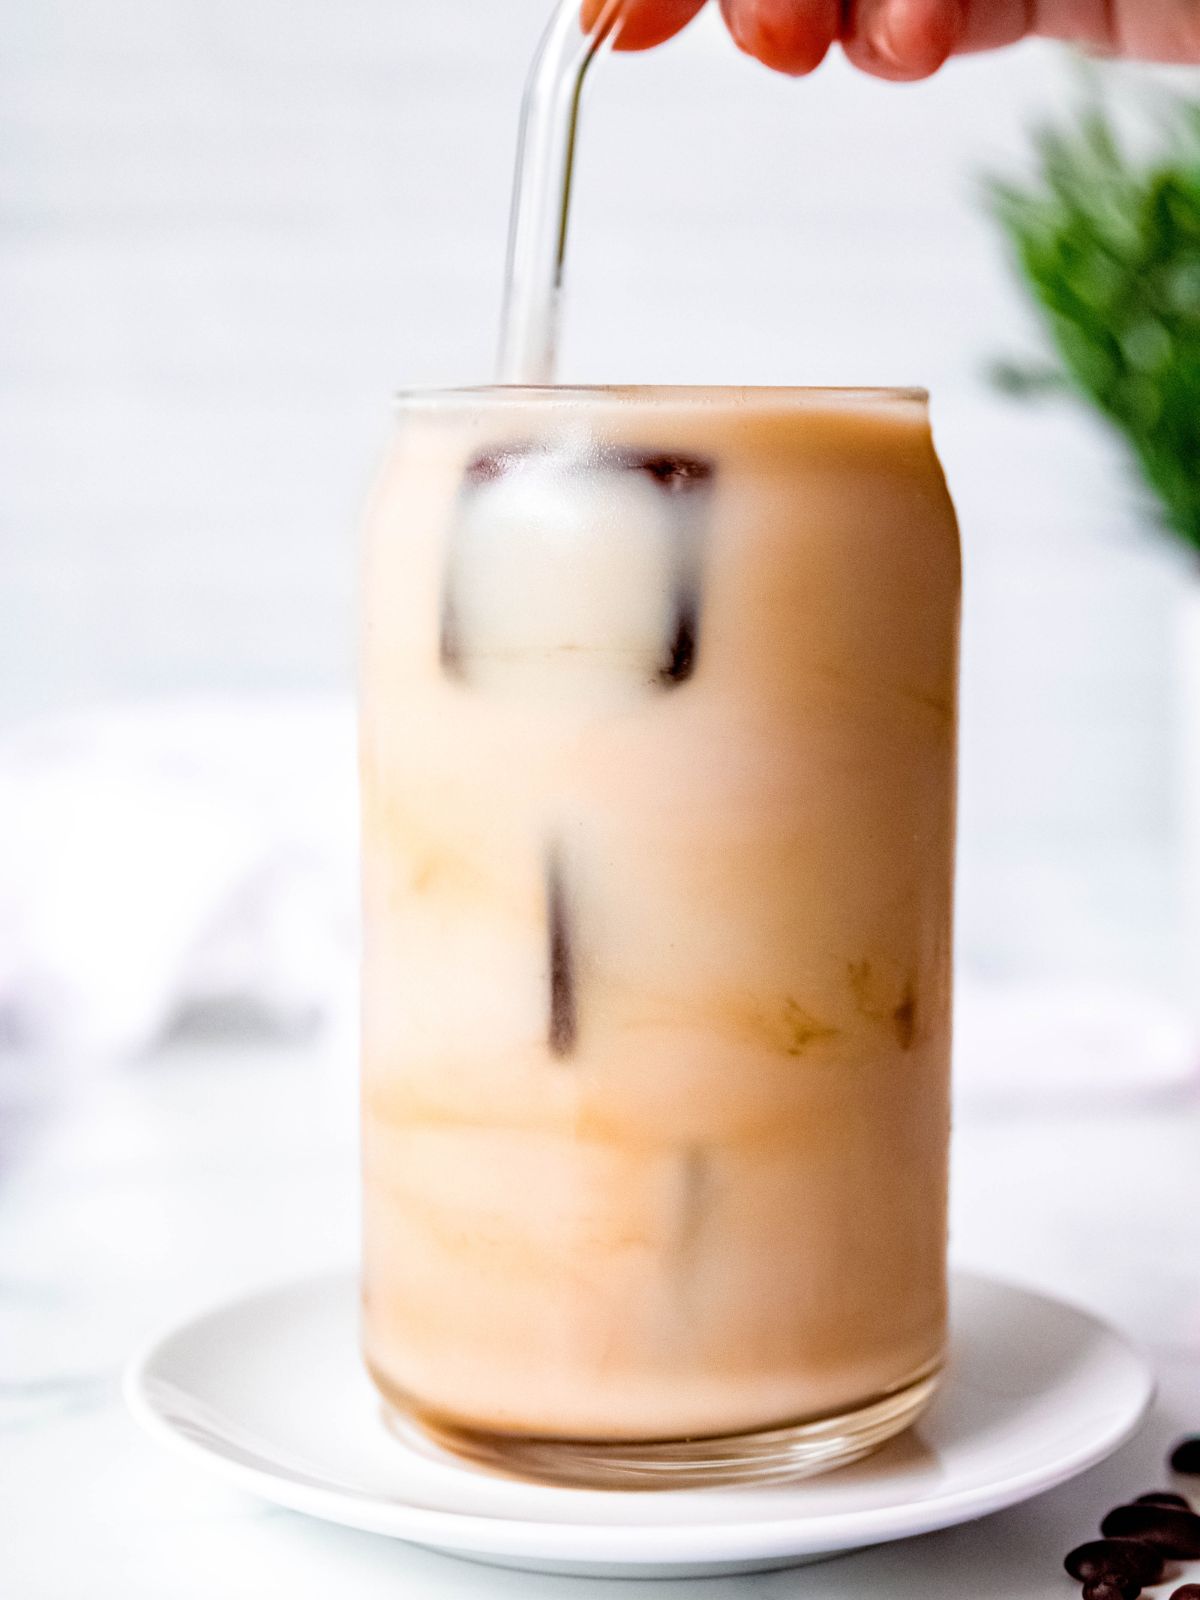 hand using a glass straw to swirl the coffee ice cubes in a glass of sweetened milk.